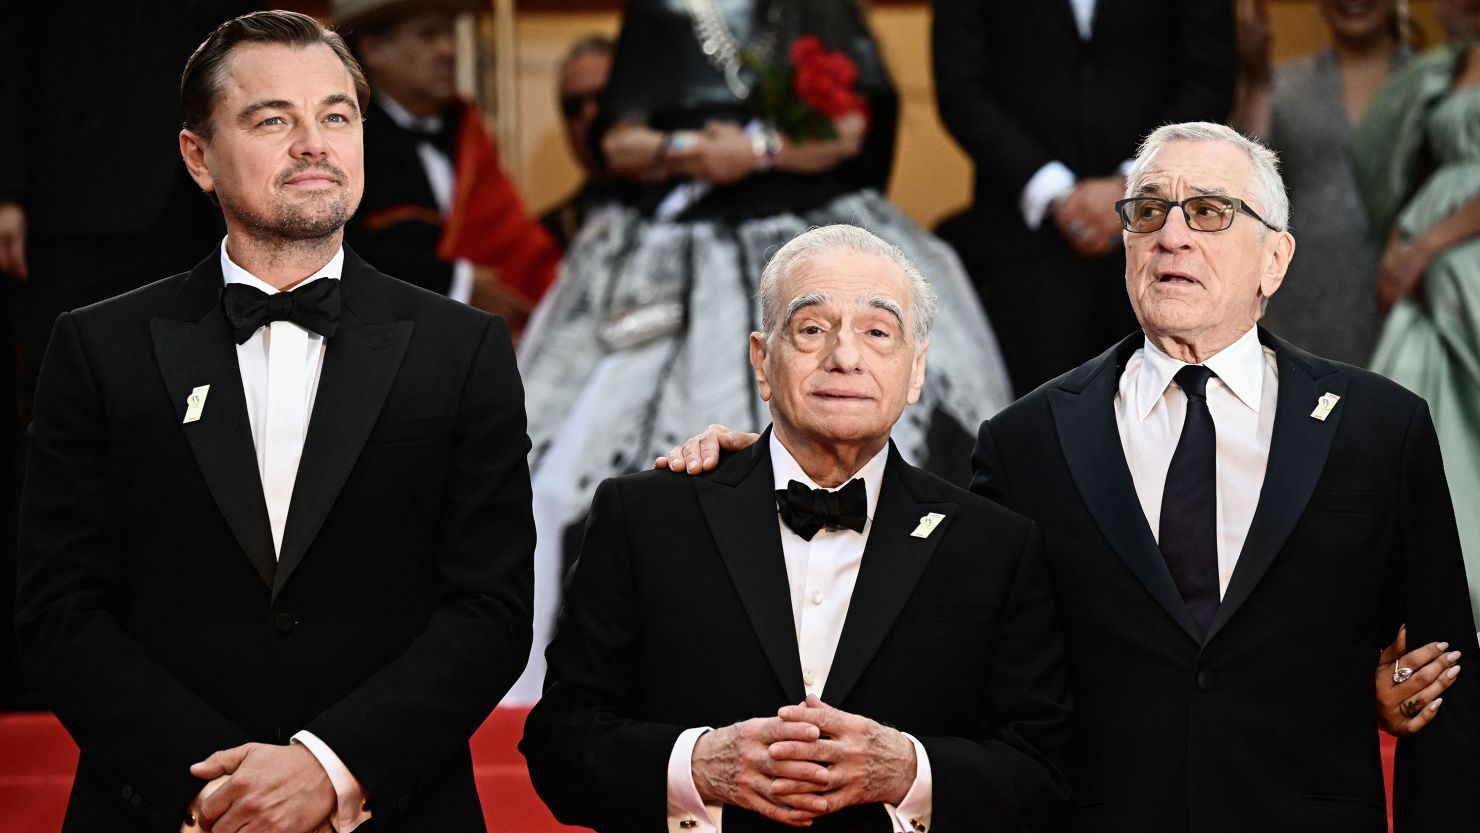 (From left) Leonardo Dicaprio, Martin Scorsese and Robert De Niro at the Cannes Film Festival premiere for 'Killers of The Flower Moon' on Saturday in France. 